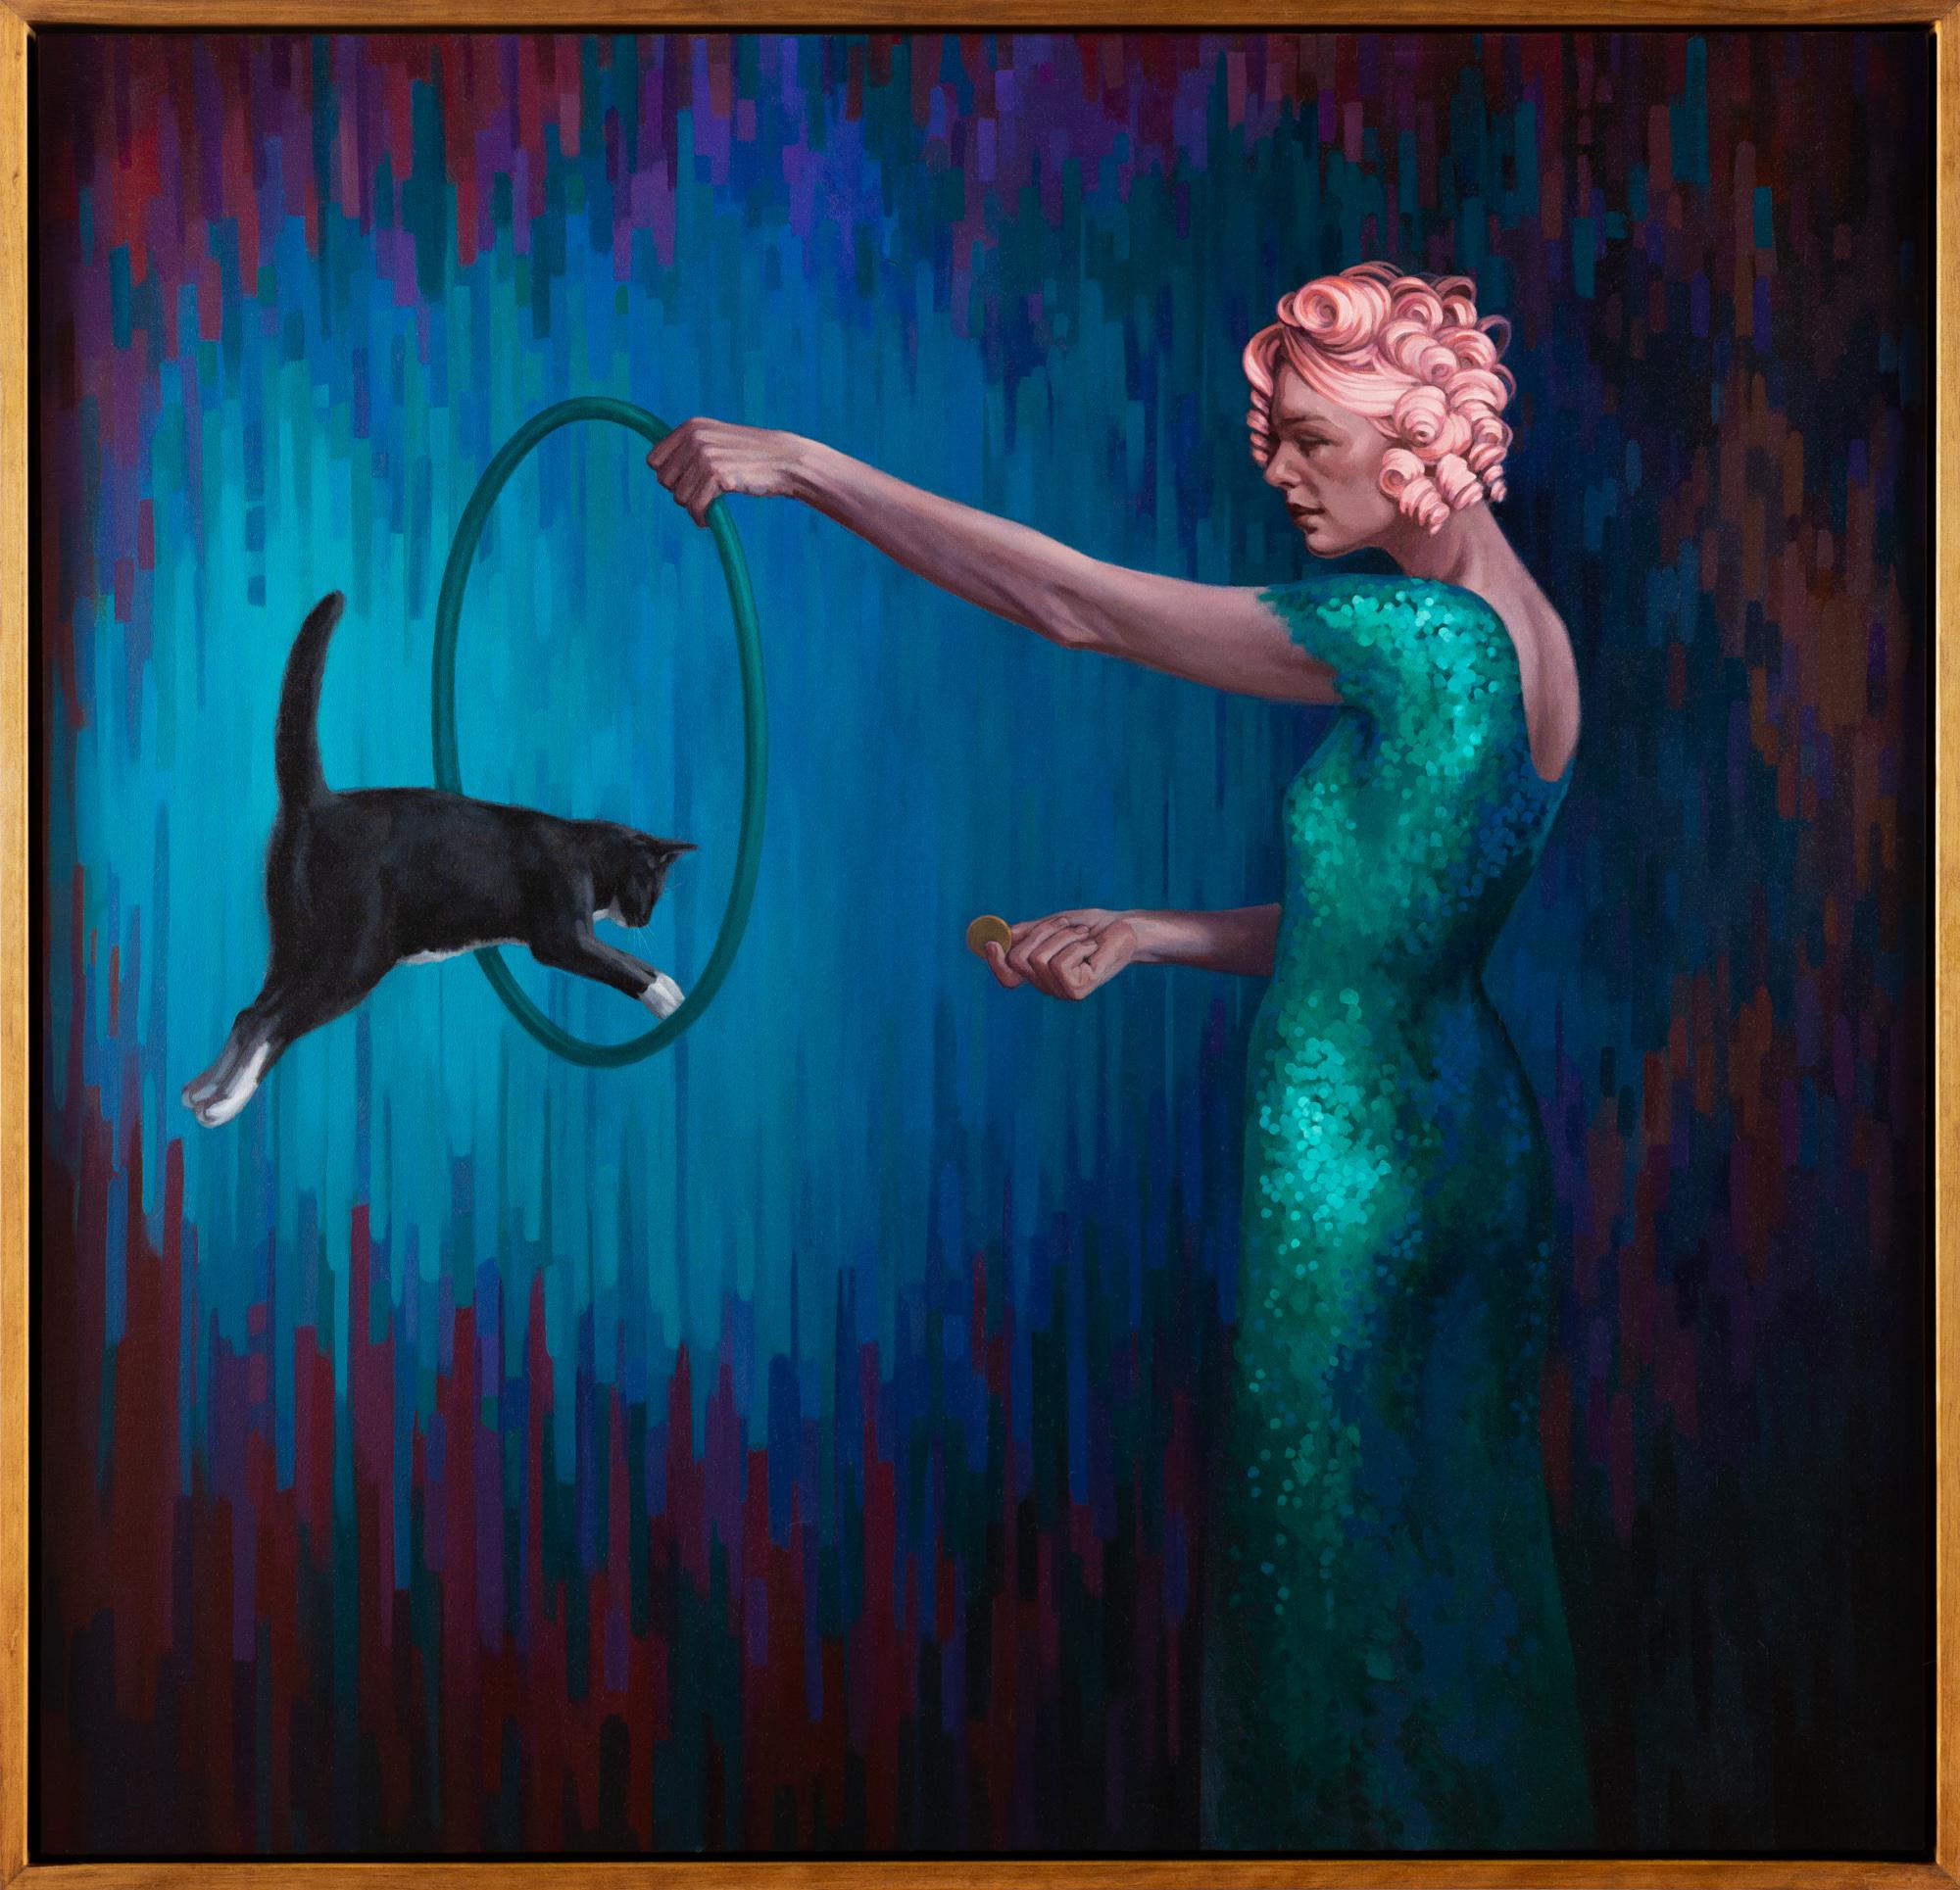 Katherine Fraser Figurative Painting - "The Creative Act" Woman with hula hoop and cat, oil on canvas